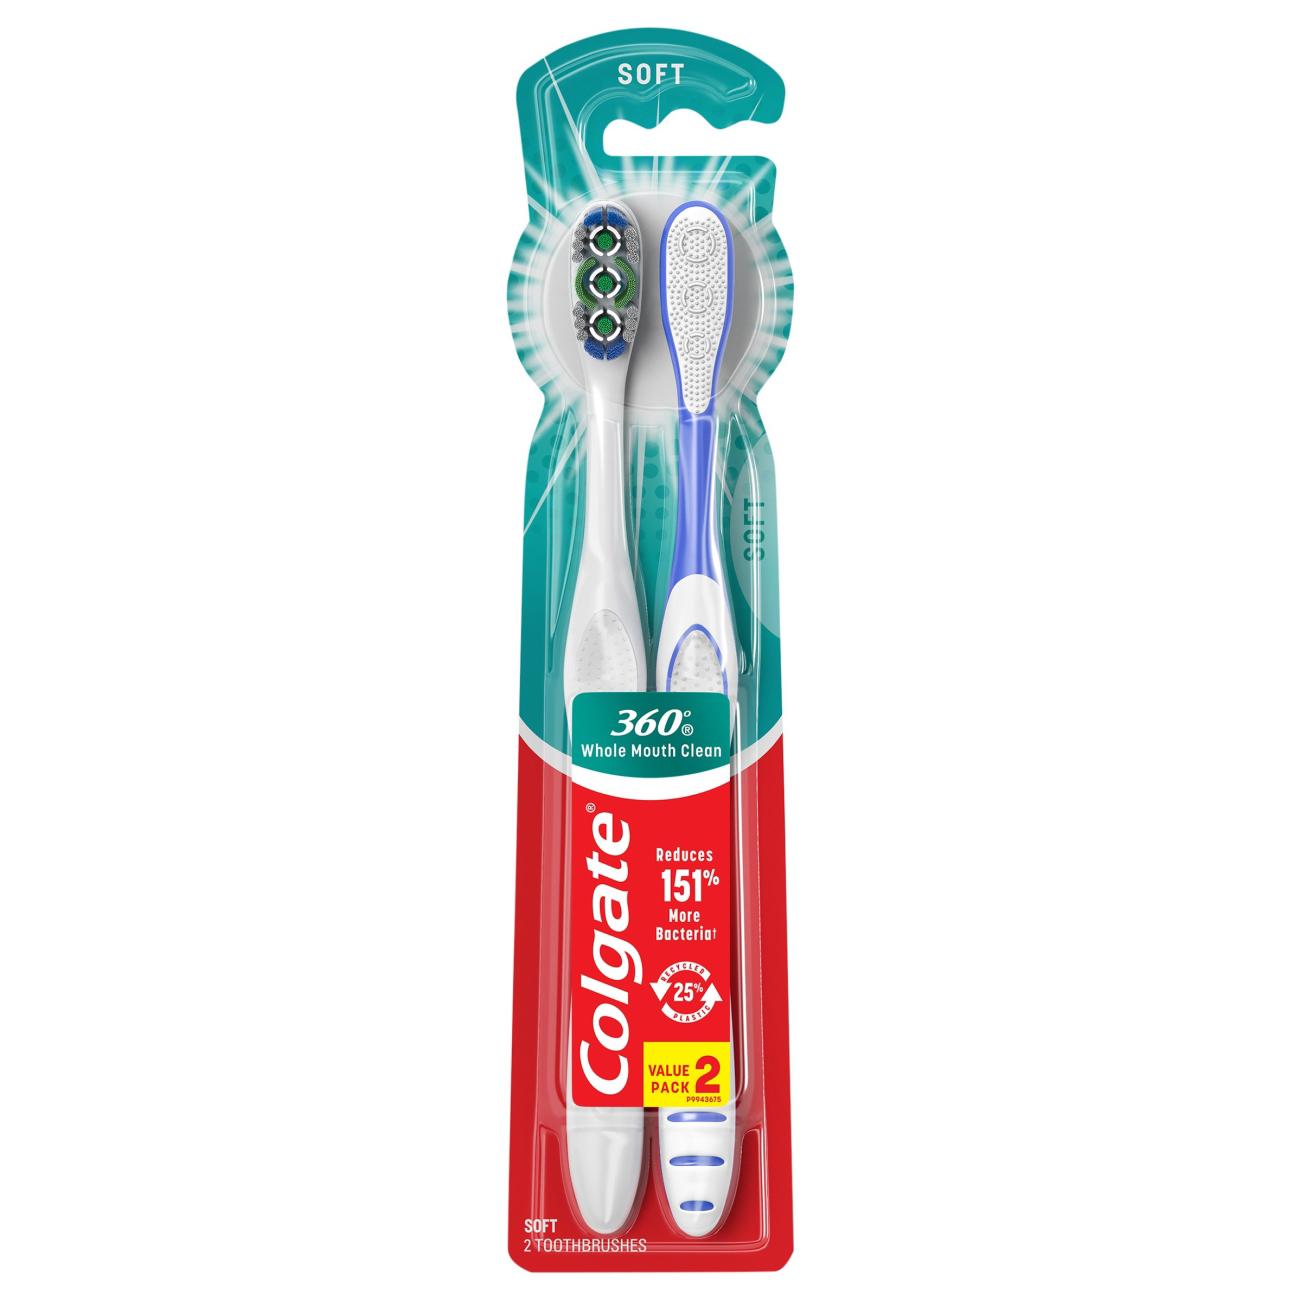 Colgate 360 Toothbrush, Soft Full Head - Colors May Vary; image 1 of 11